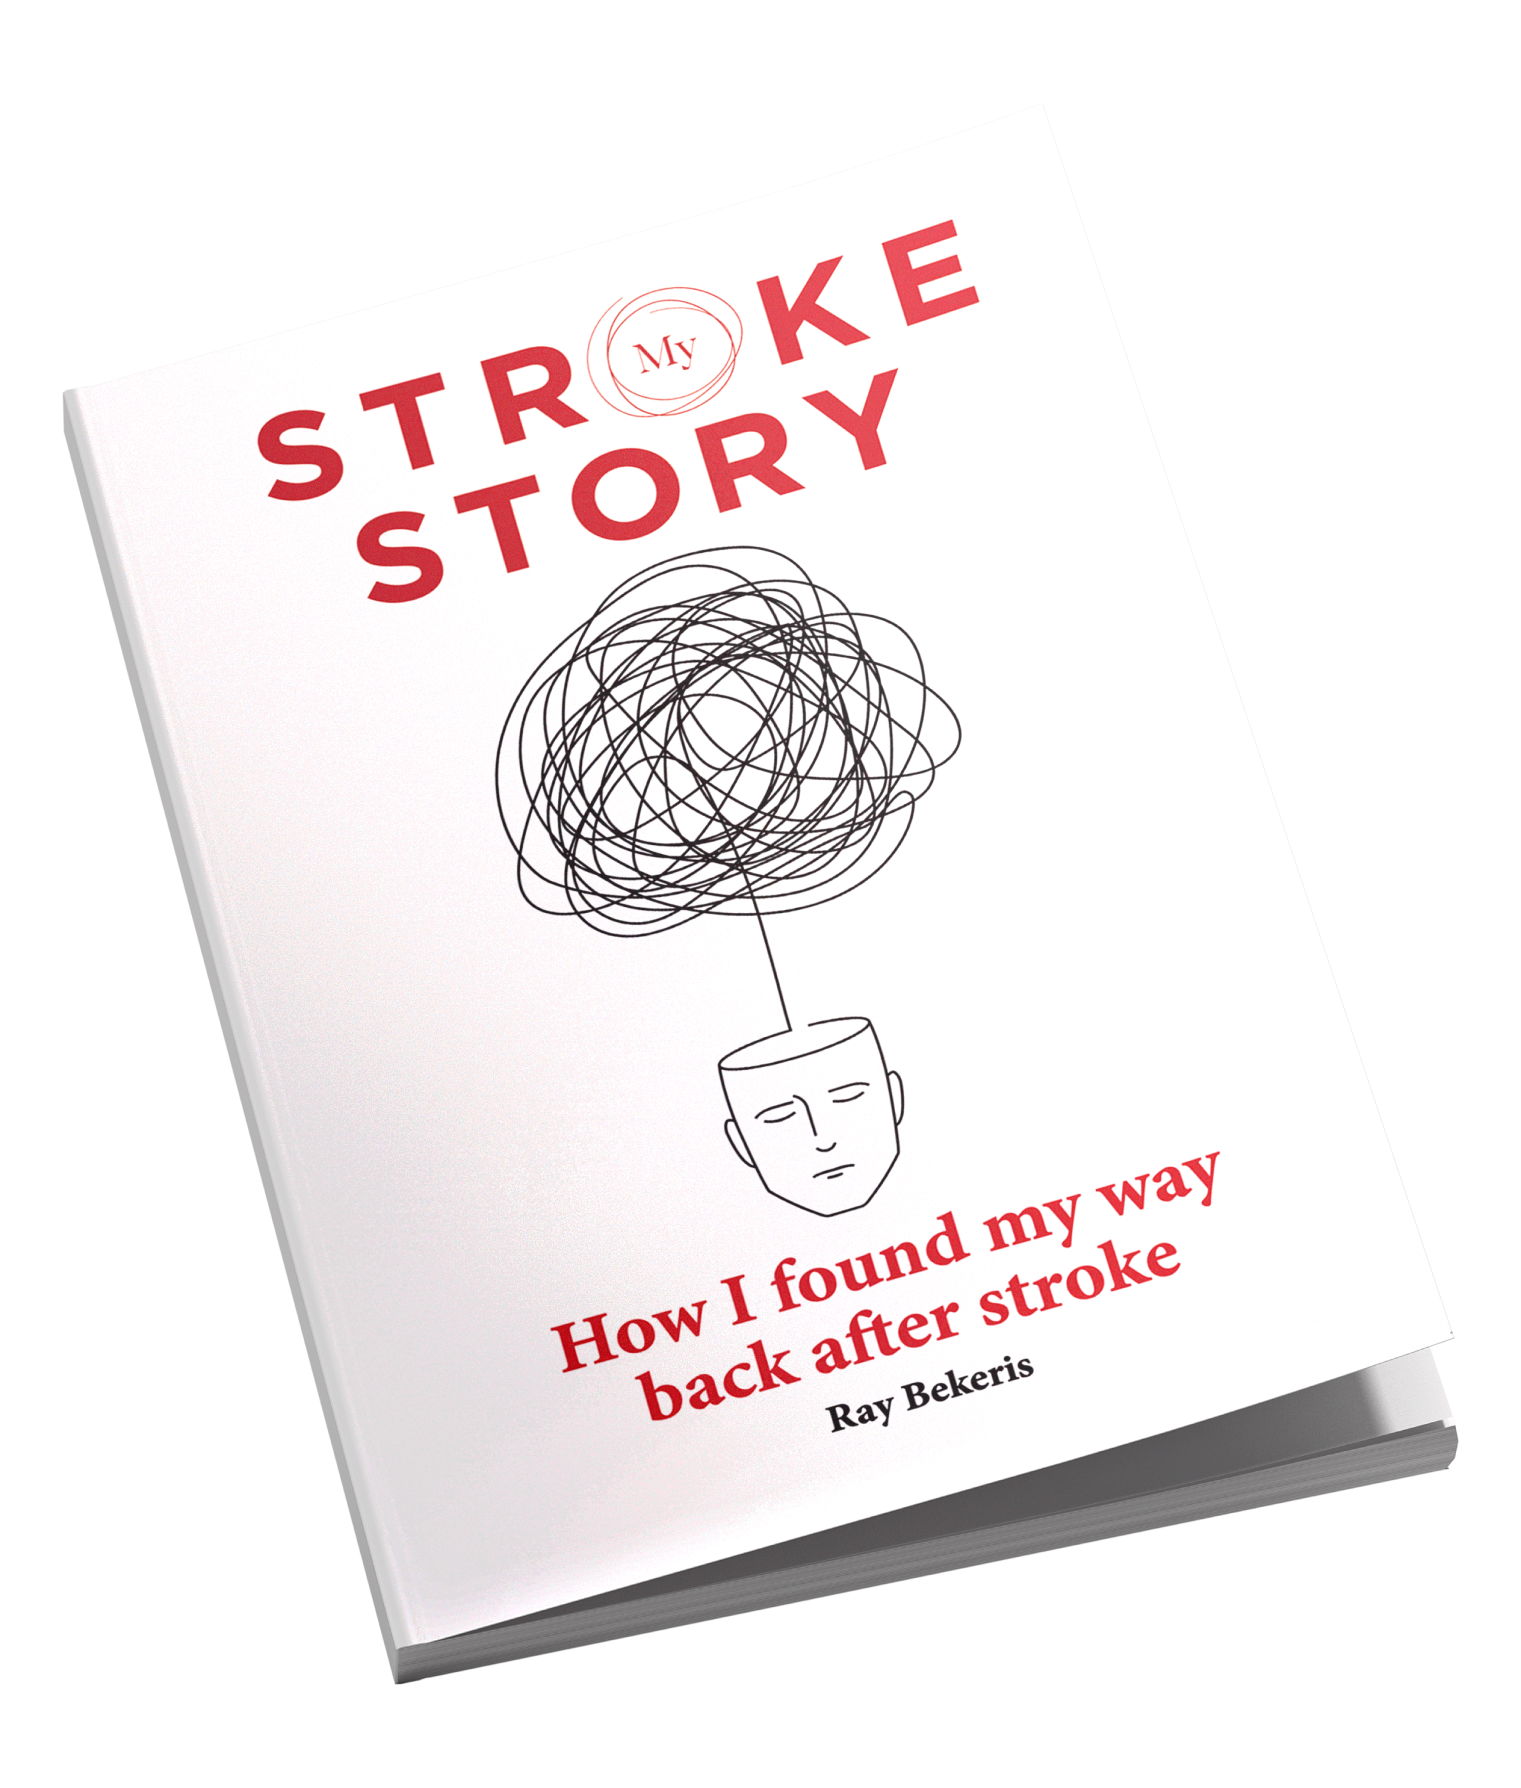 My Stroke Story by Ray Bekeris - Book cover